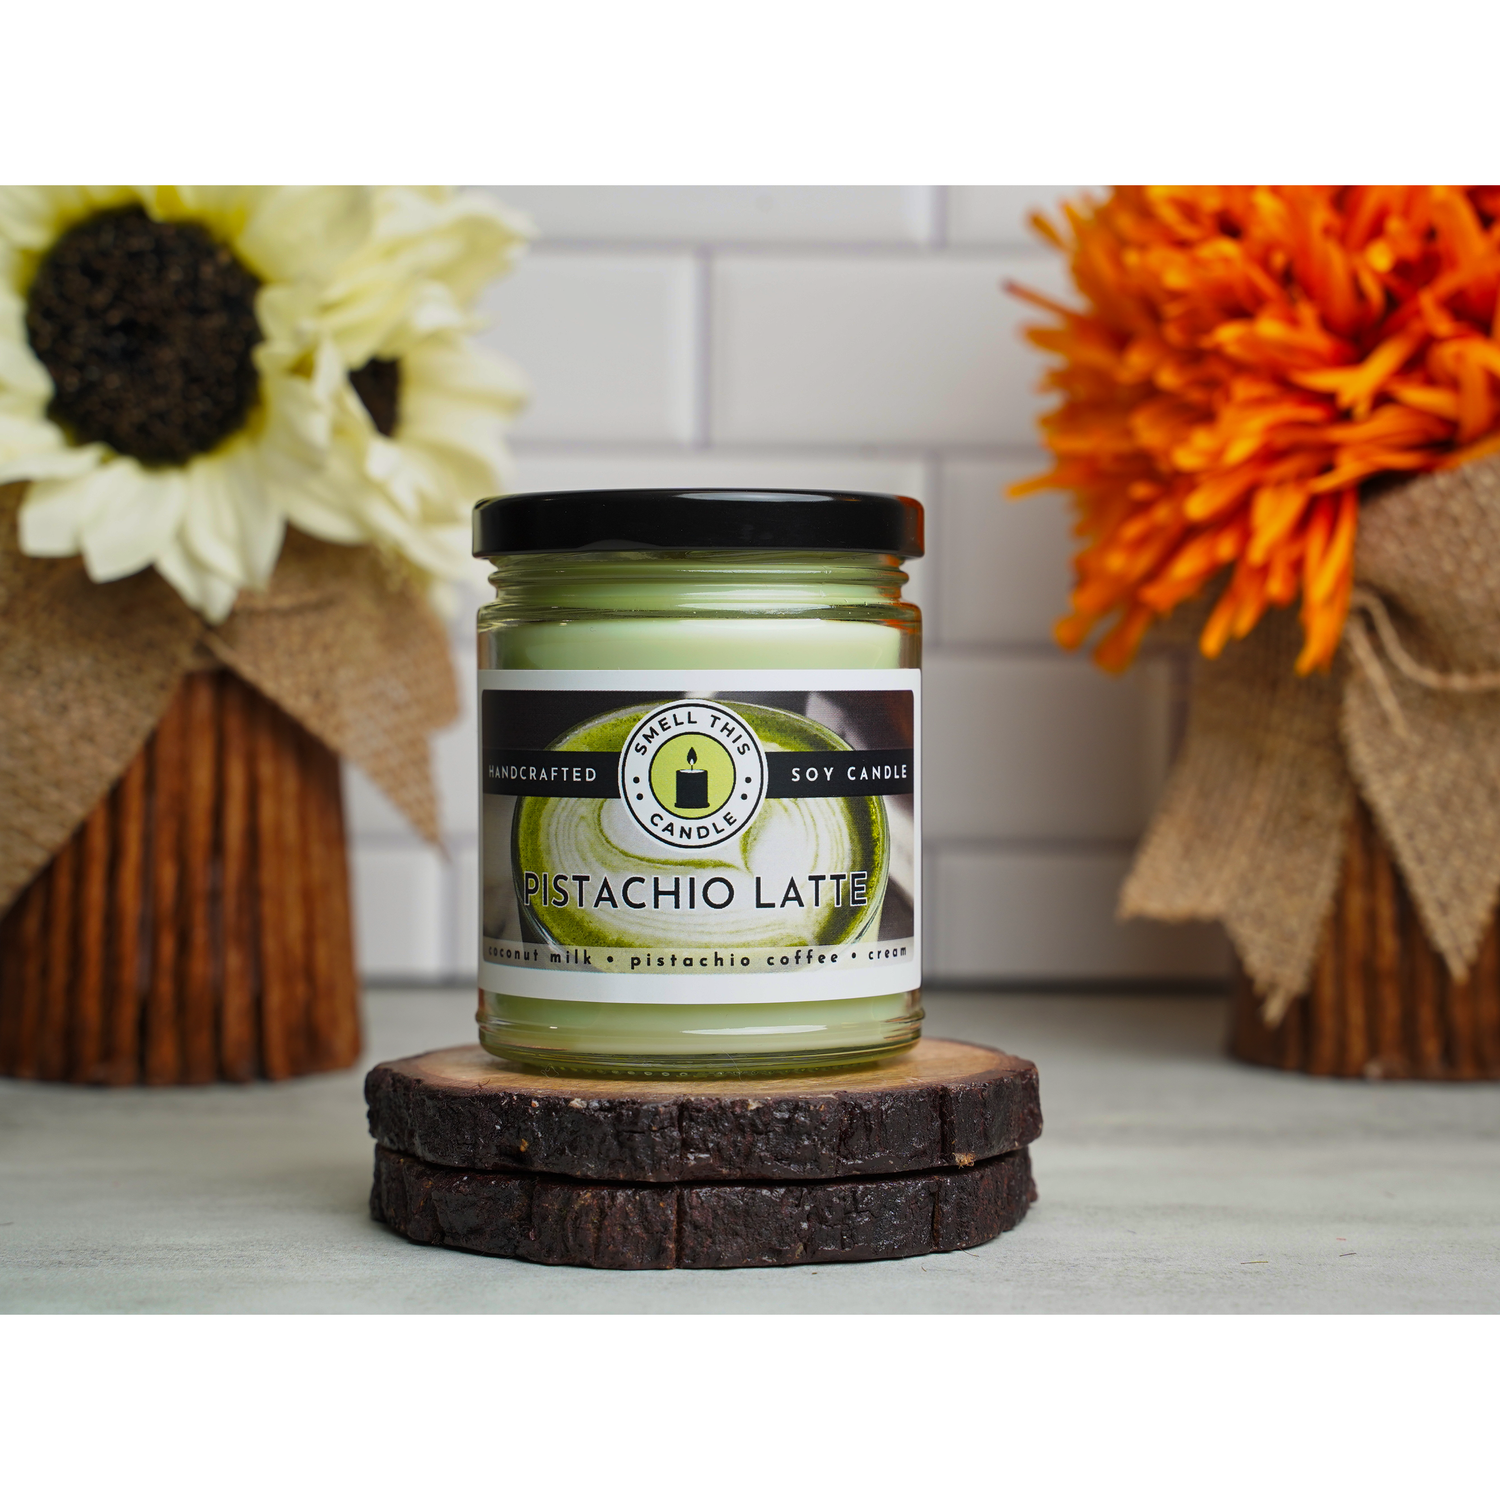 Pistachio Latte candle - Smell This Candle - Candles